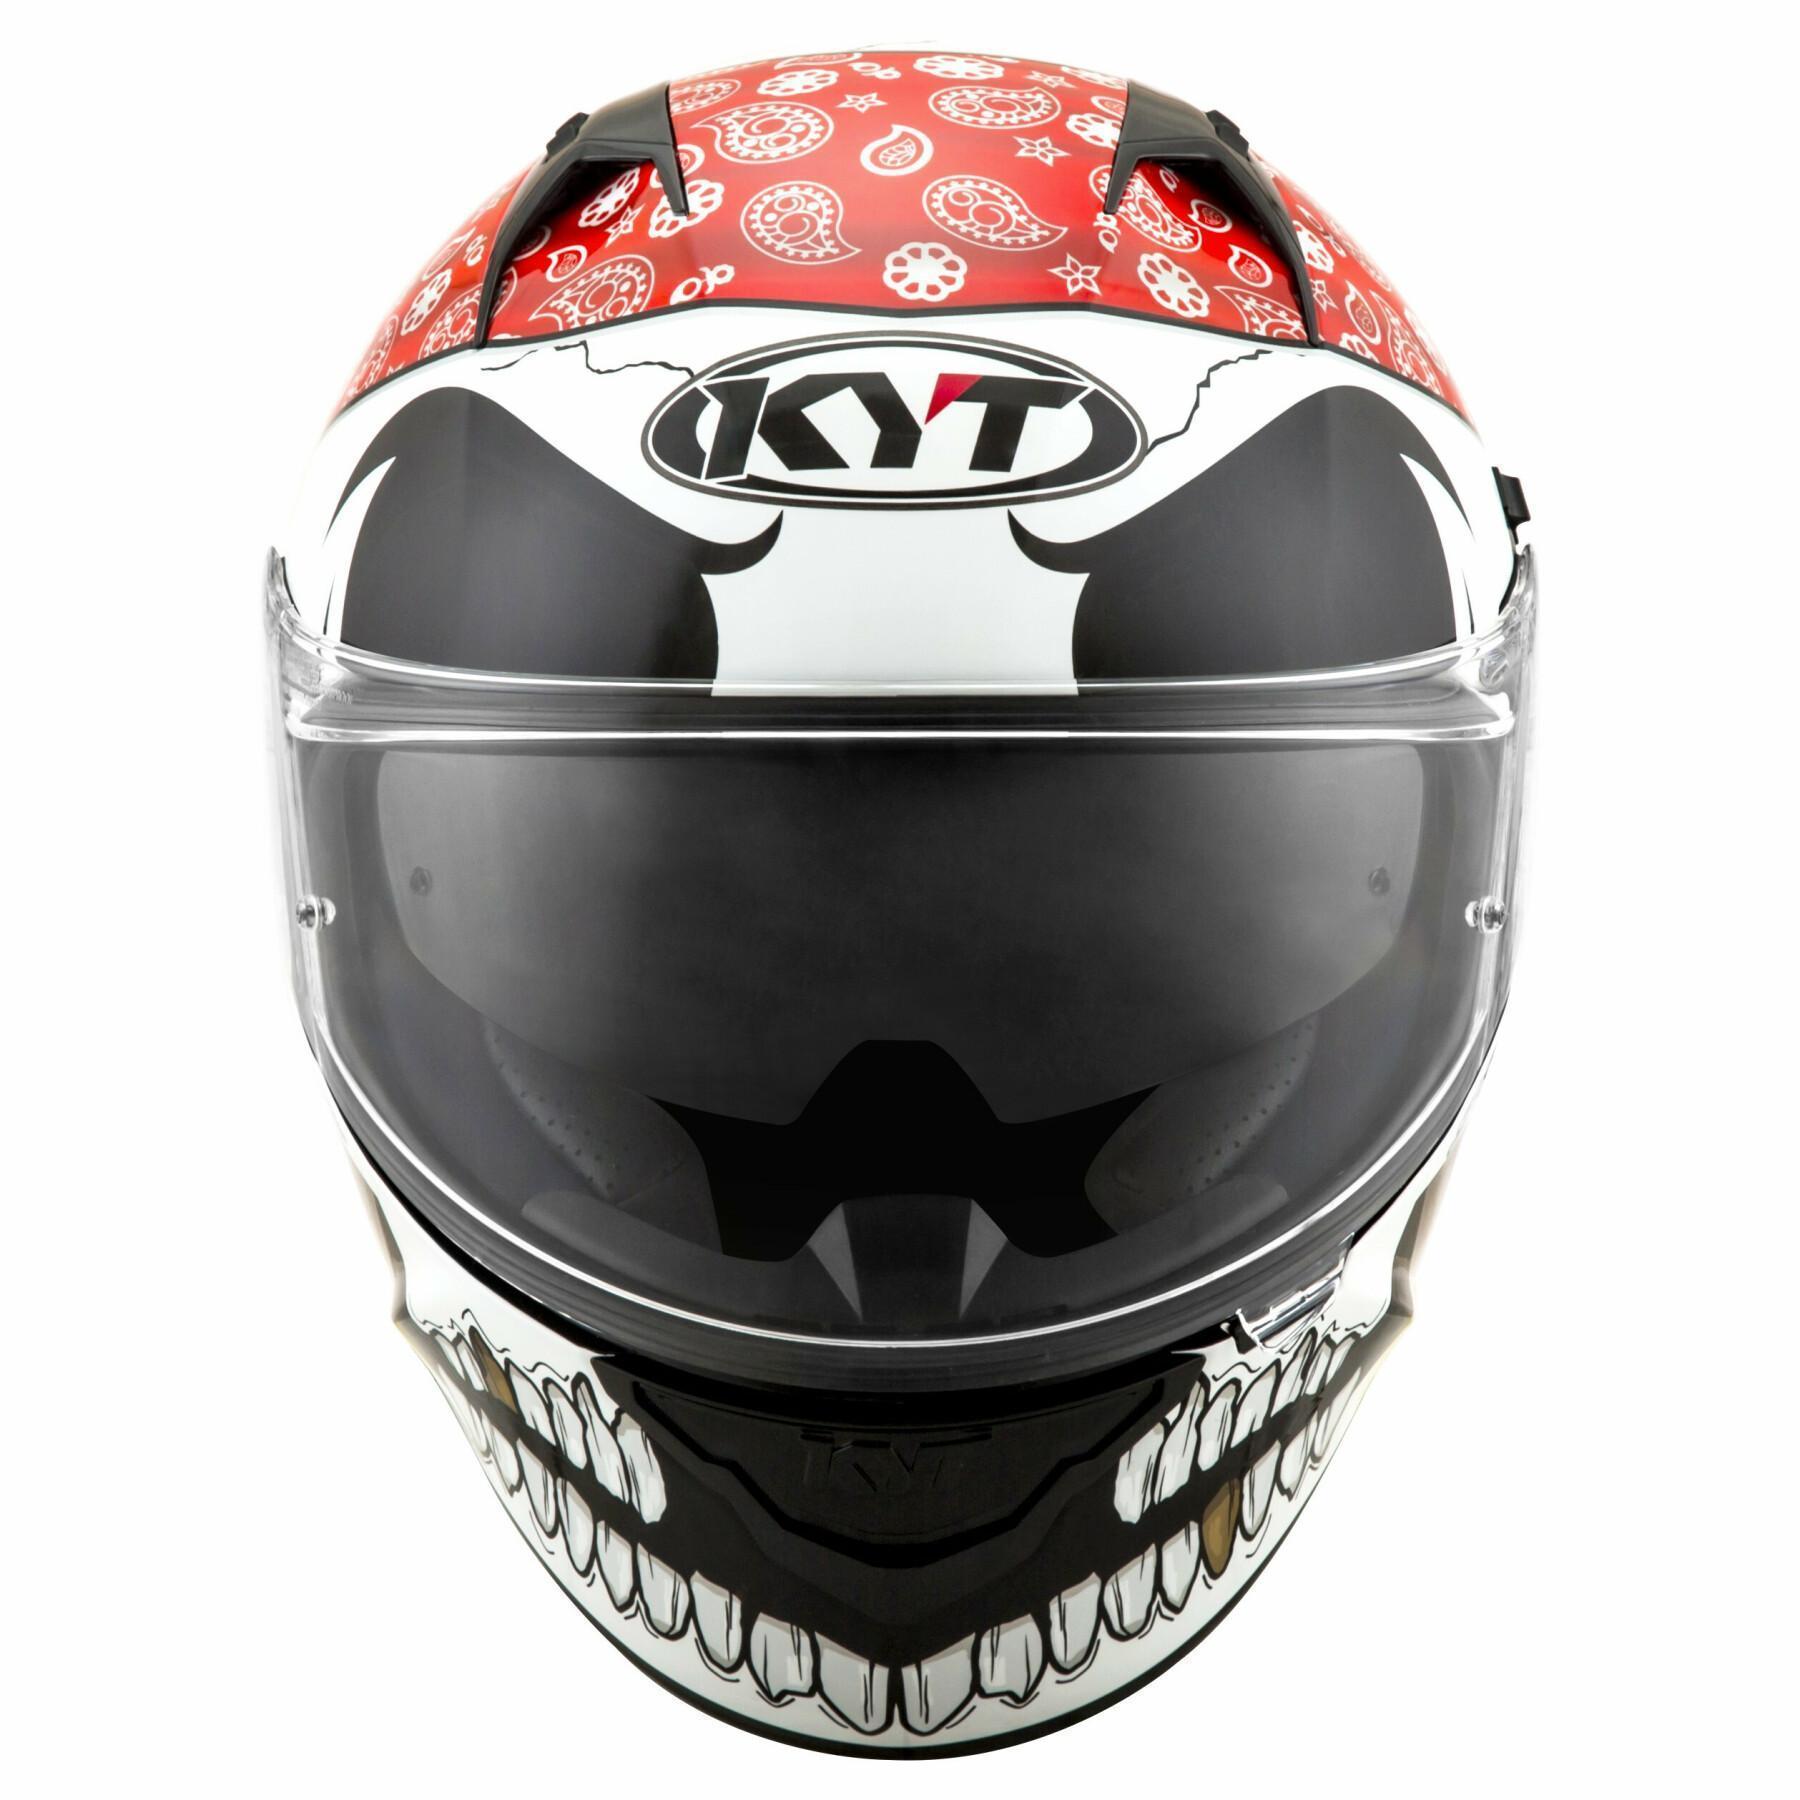 Capacete facial completo Kyt nf-r pirate